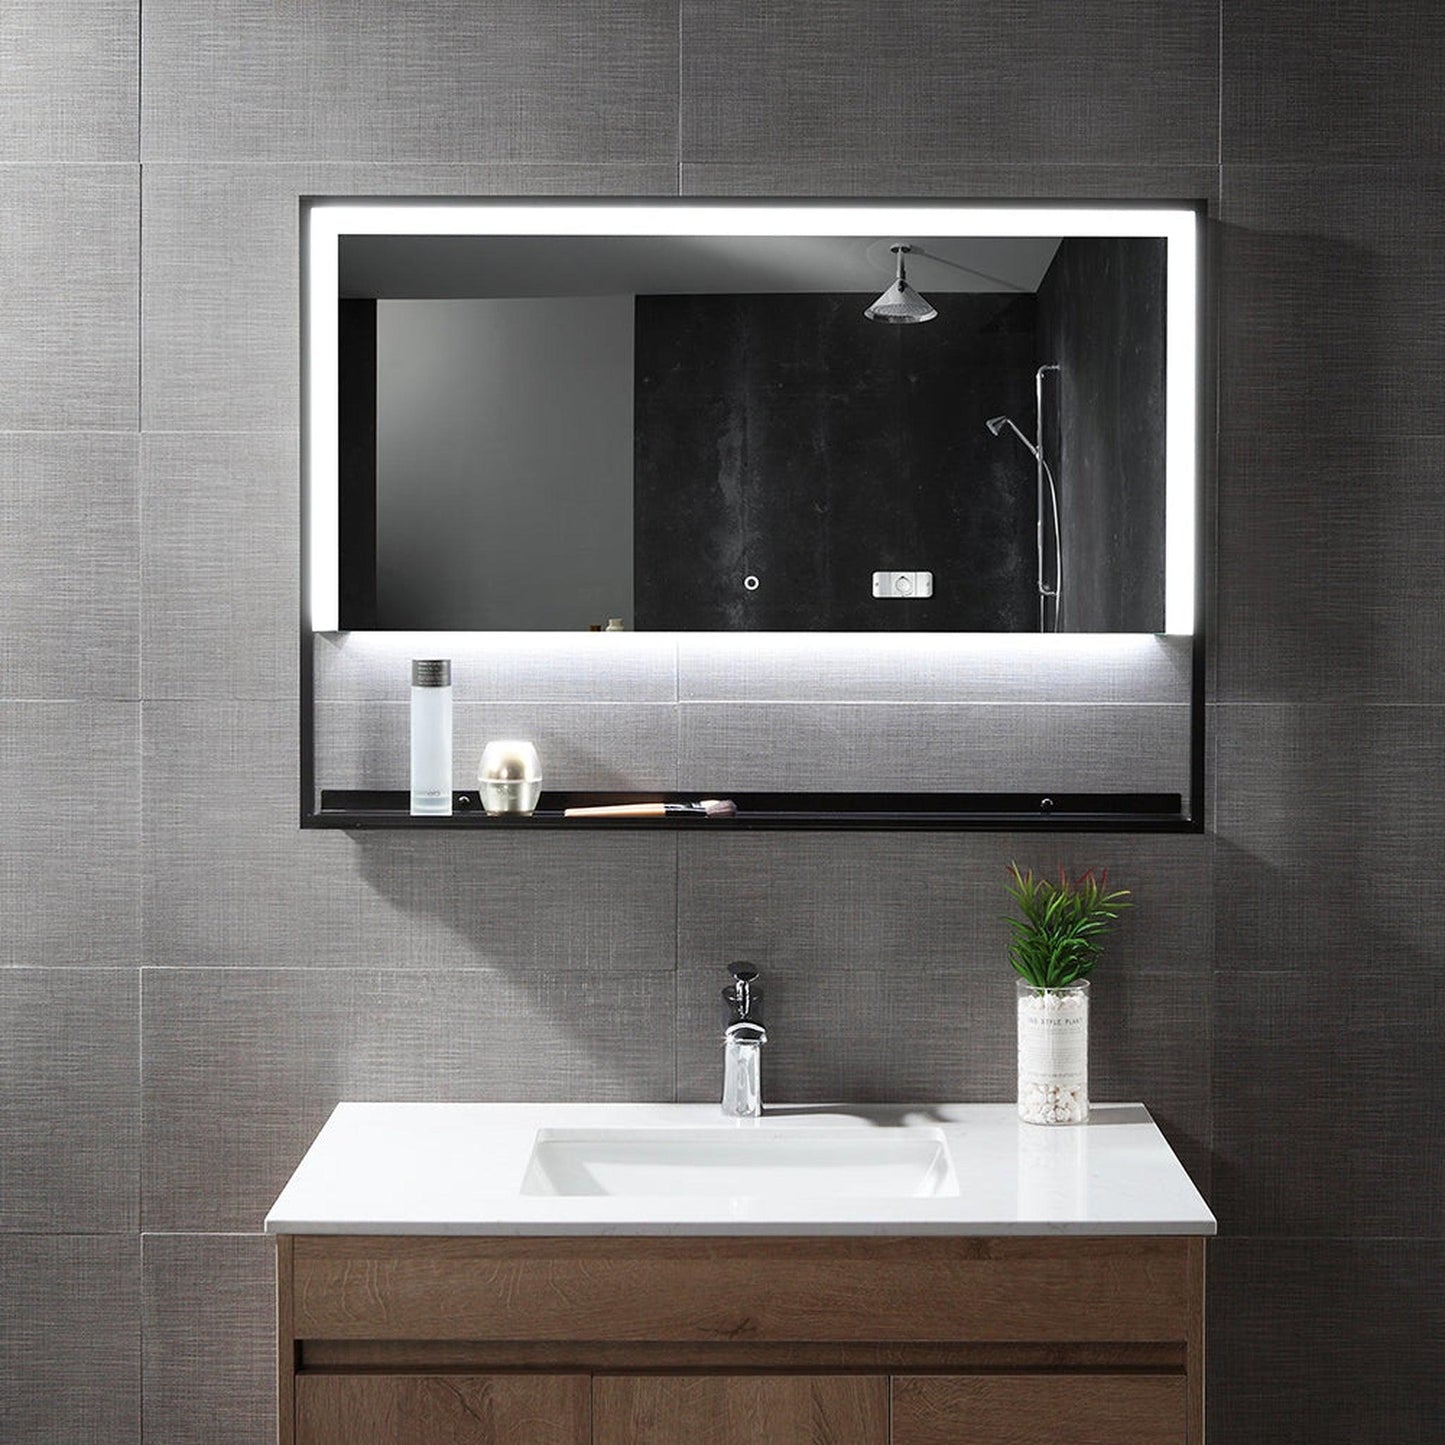 Eurofase Lighting Sayora 47" x 28" Rectangular Mirror With Back-Lit Integrated LED And A Built-In Shelf